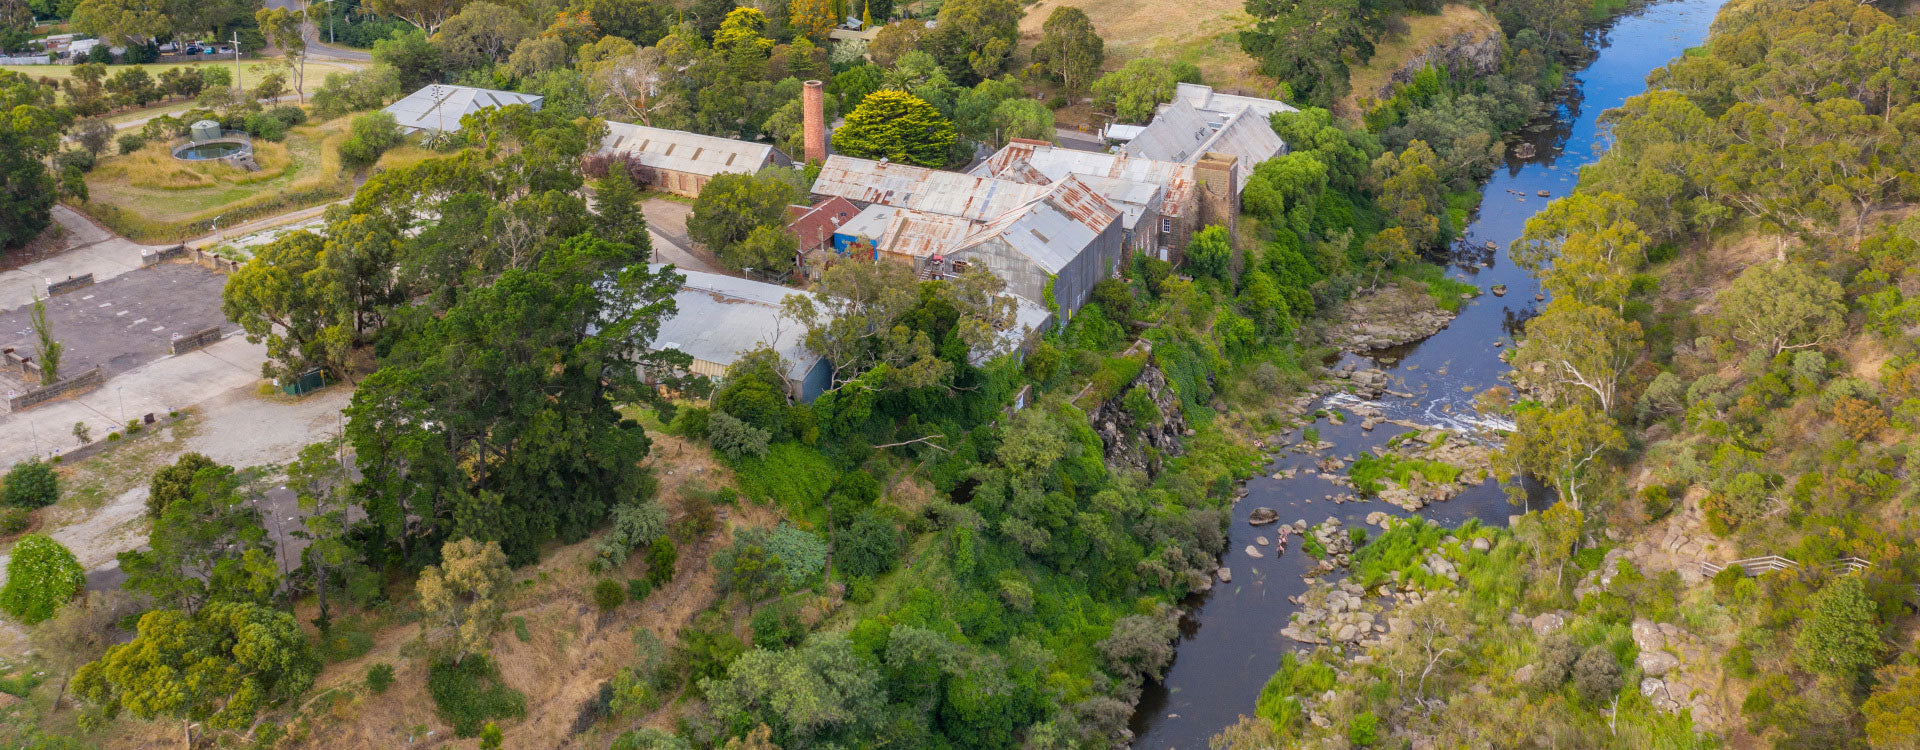 Ariel Image of Barwon River and Historic Fyansford Papermill now home to Provenance Winery